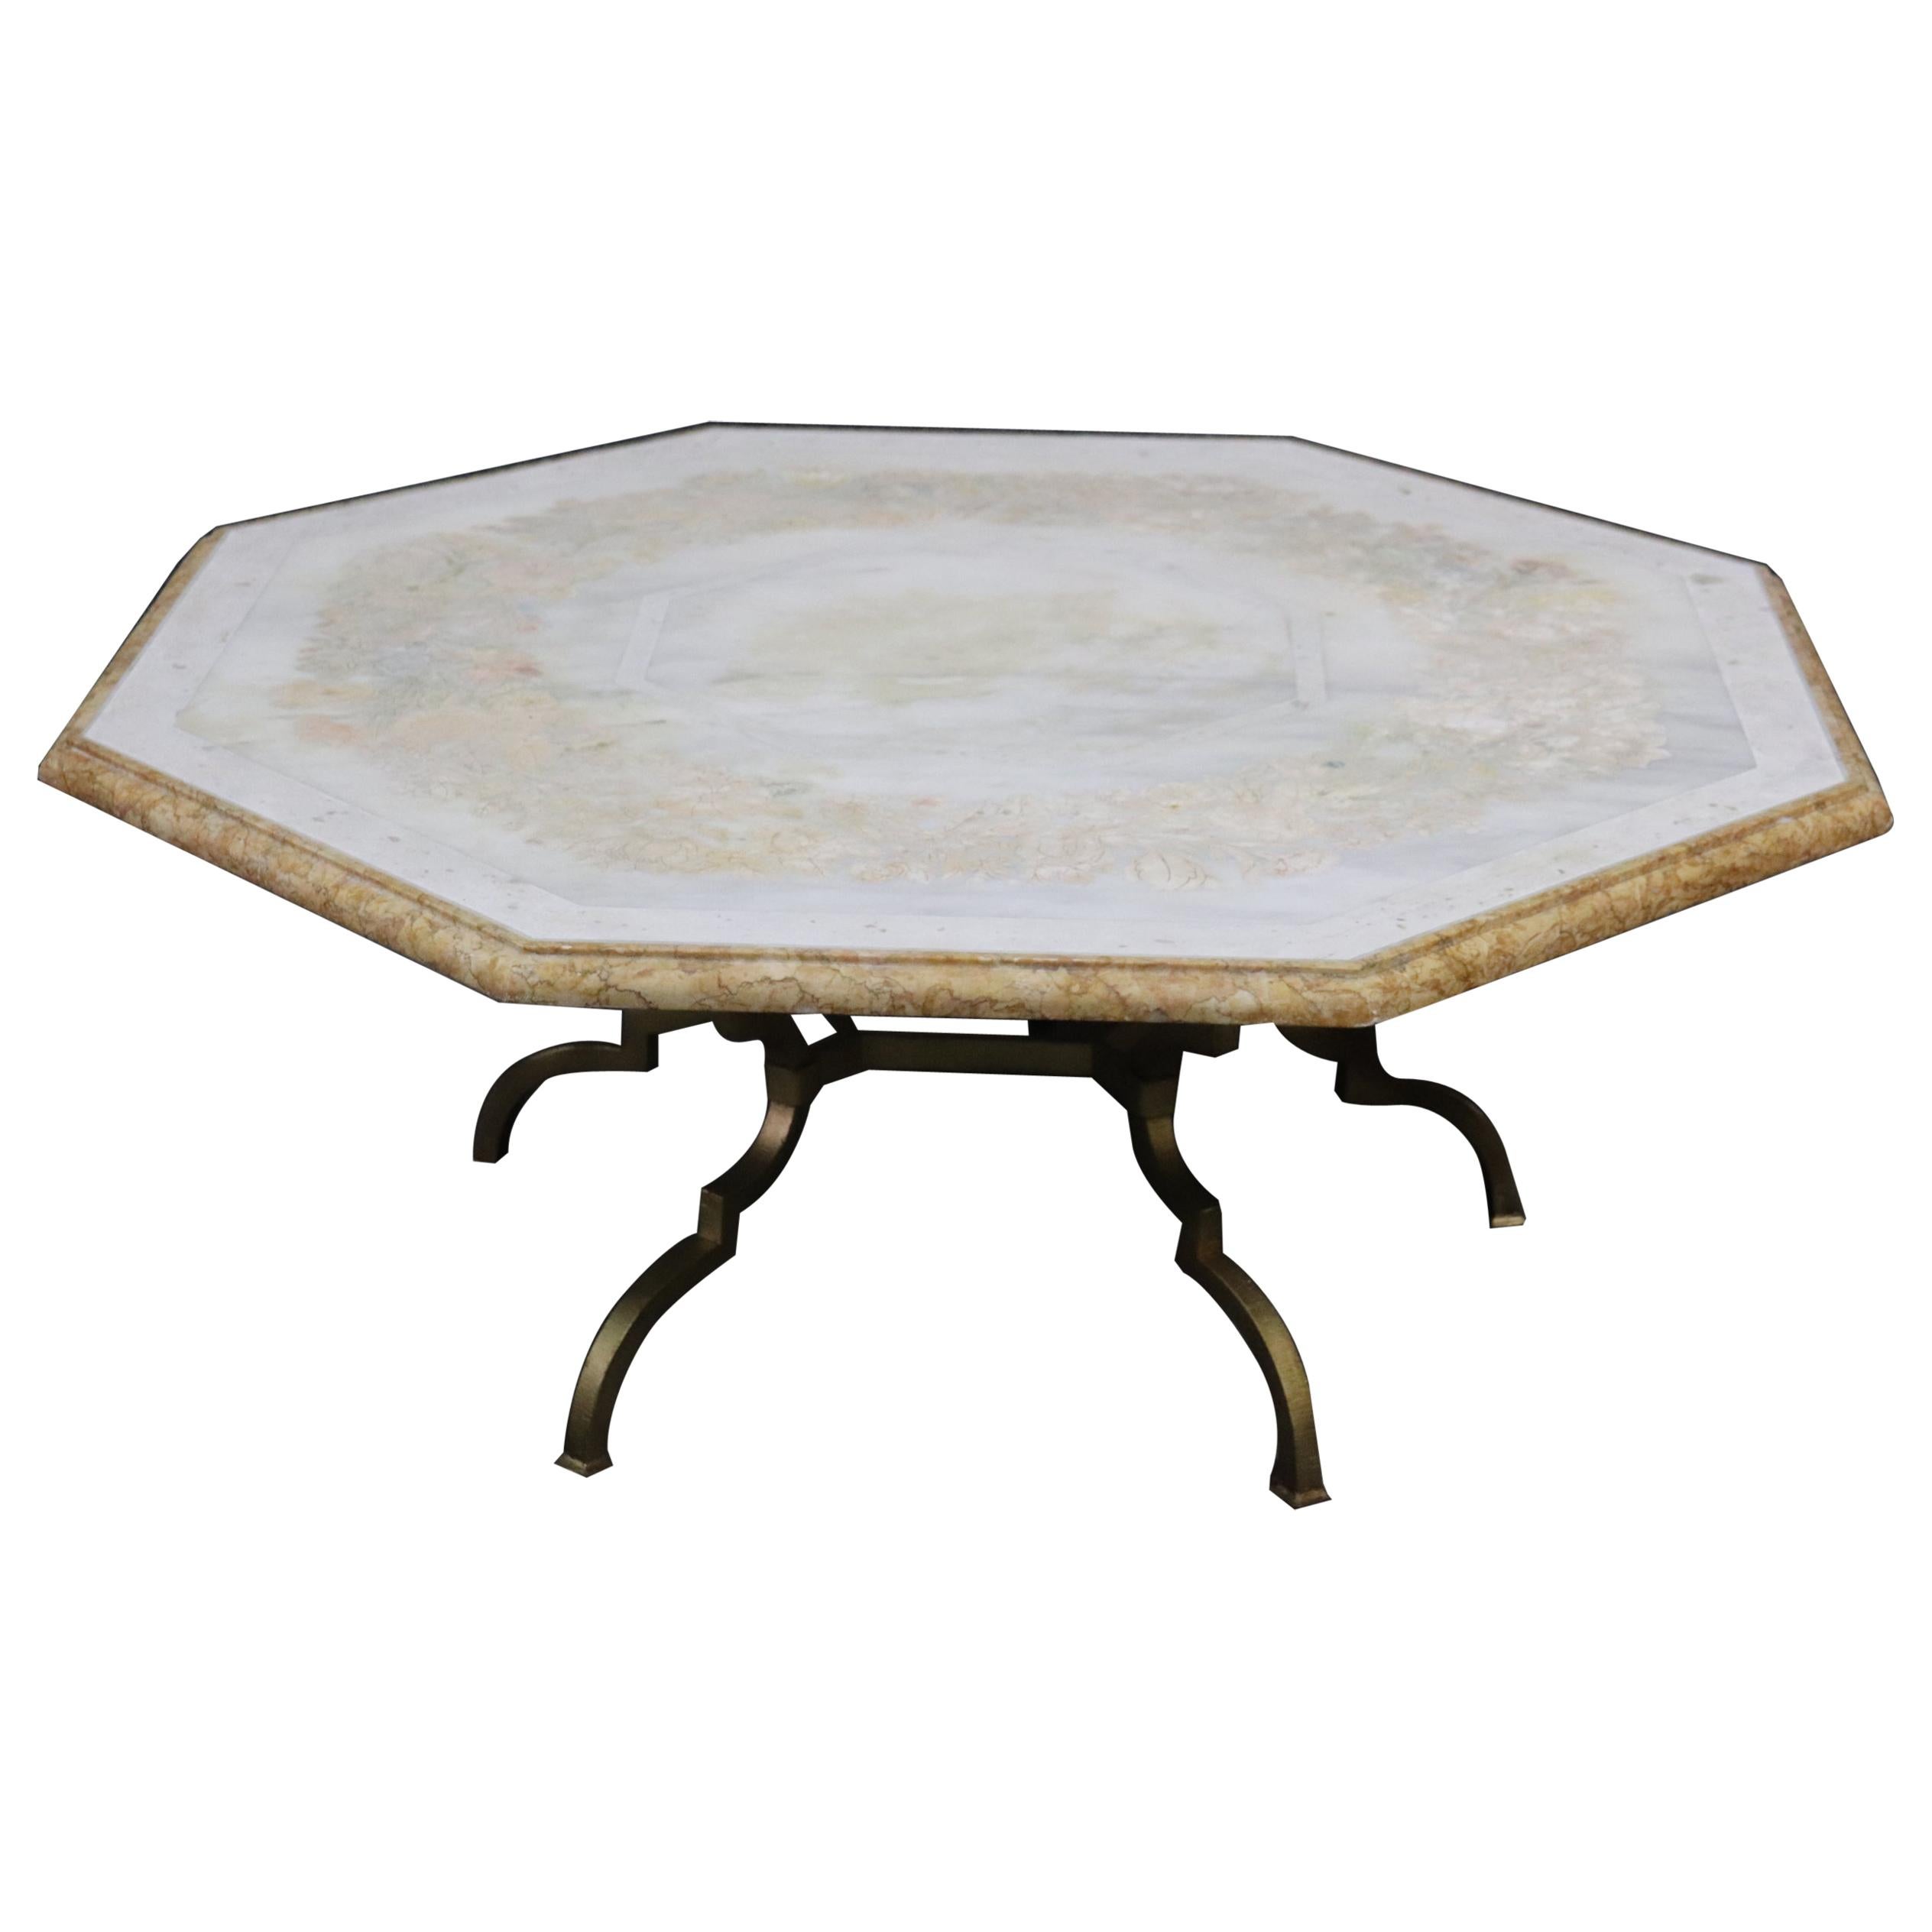 Mid-Century Modern Italian Inlaid Marble and Brass Octagonal Coffee Table